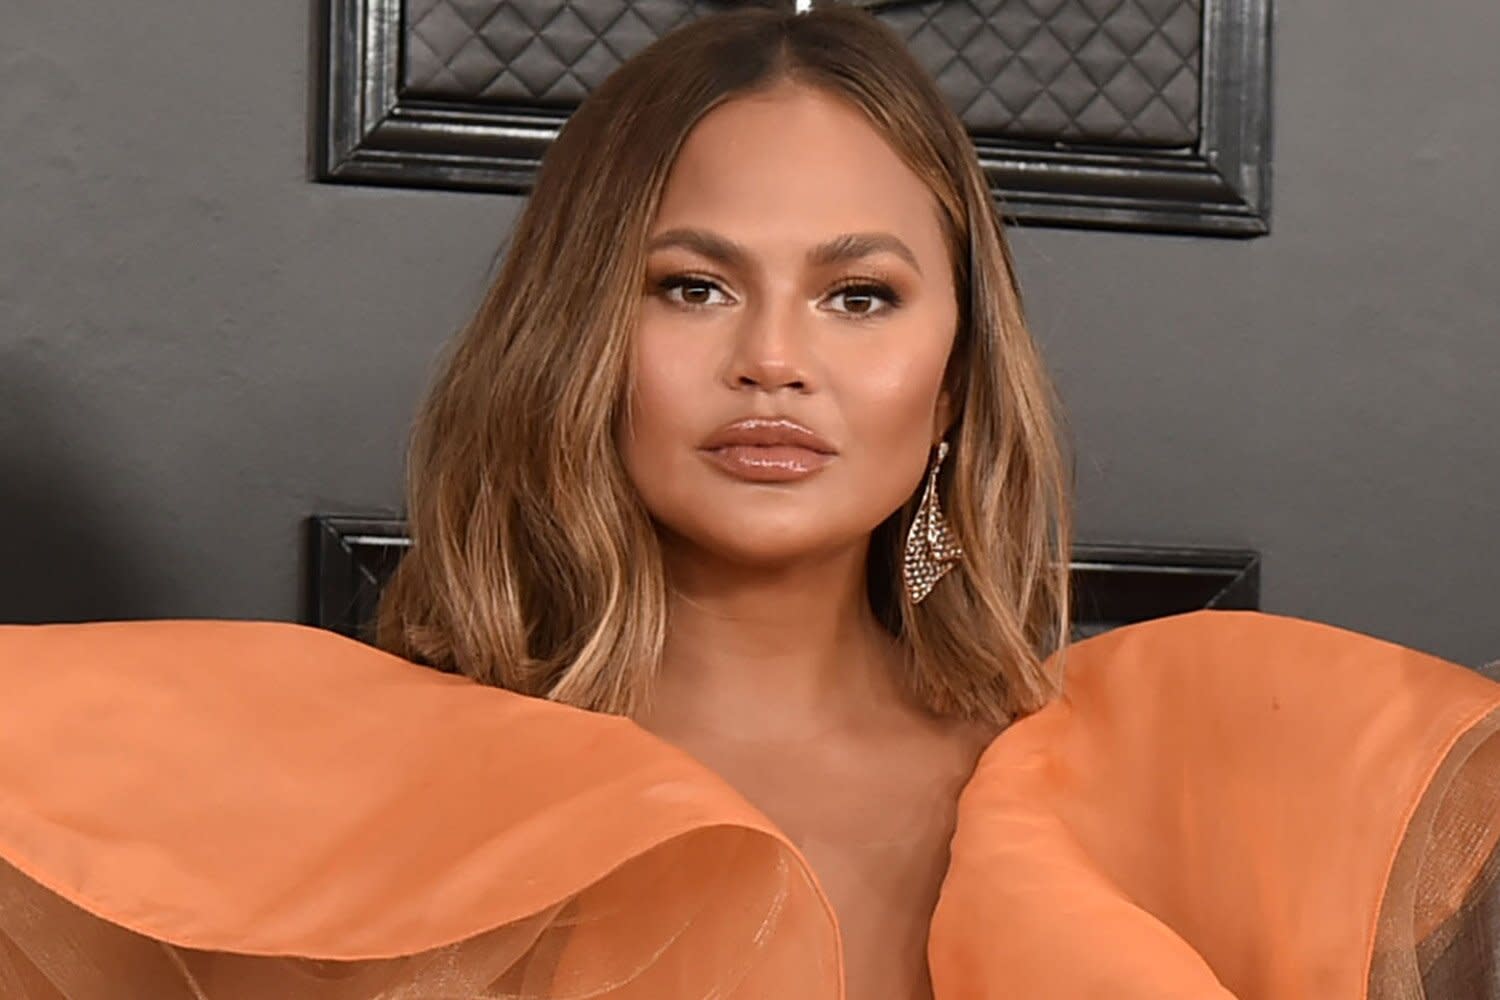 Chrissy Teigen talks about the book that inspired her sobriety, stop like a woman